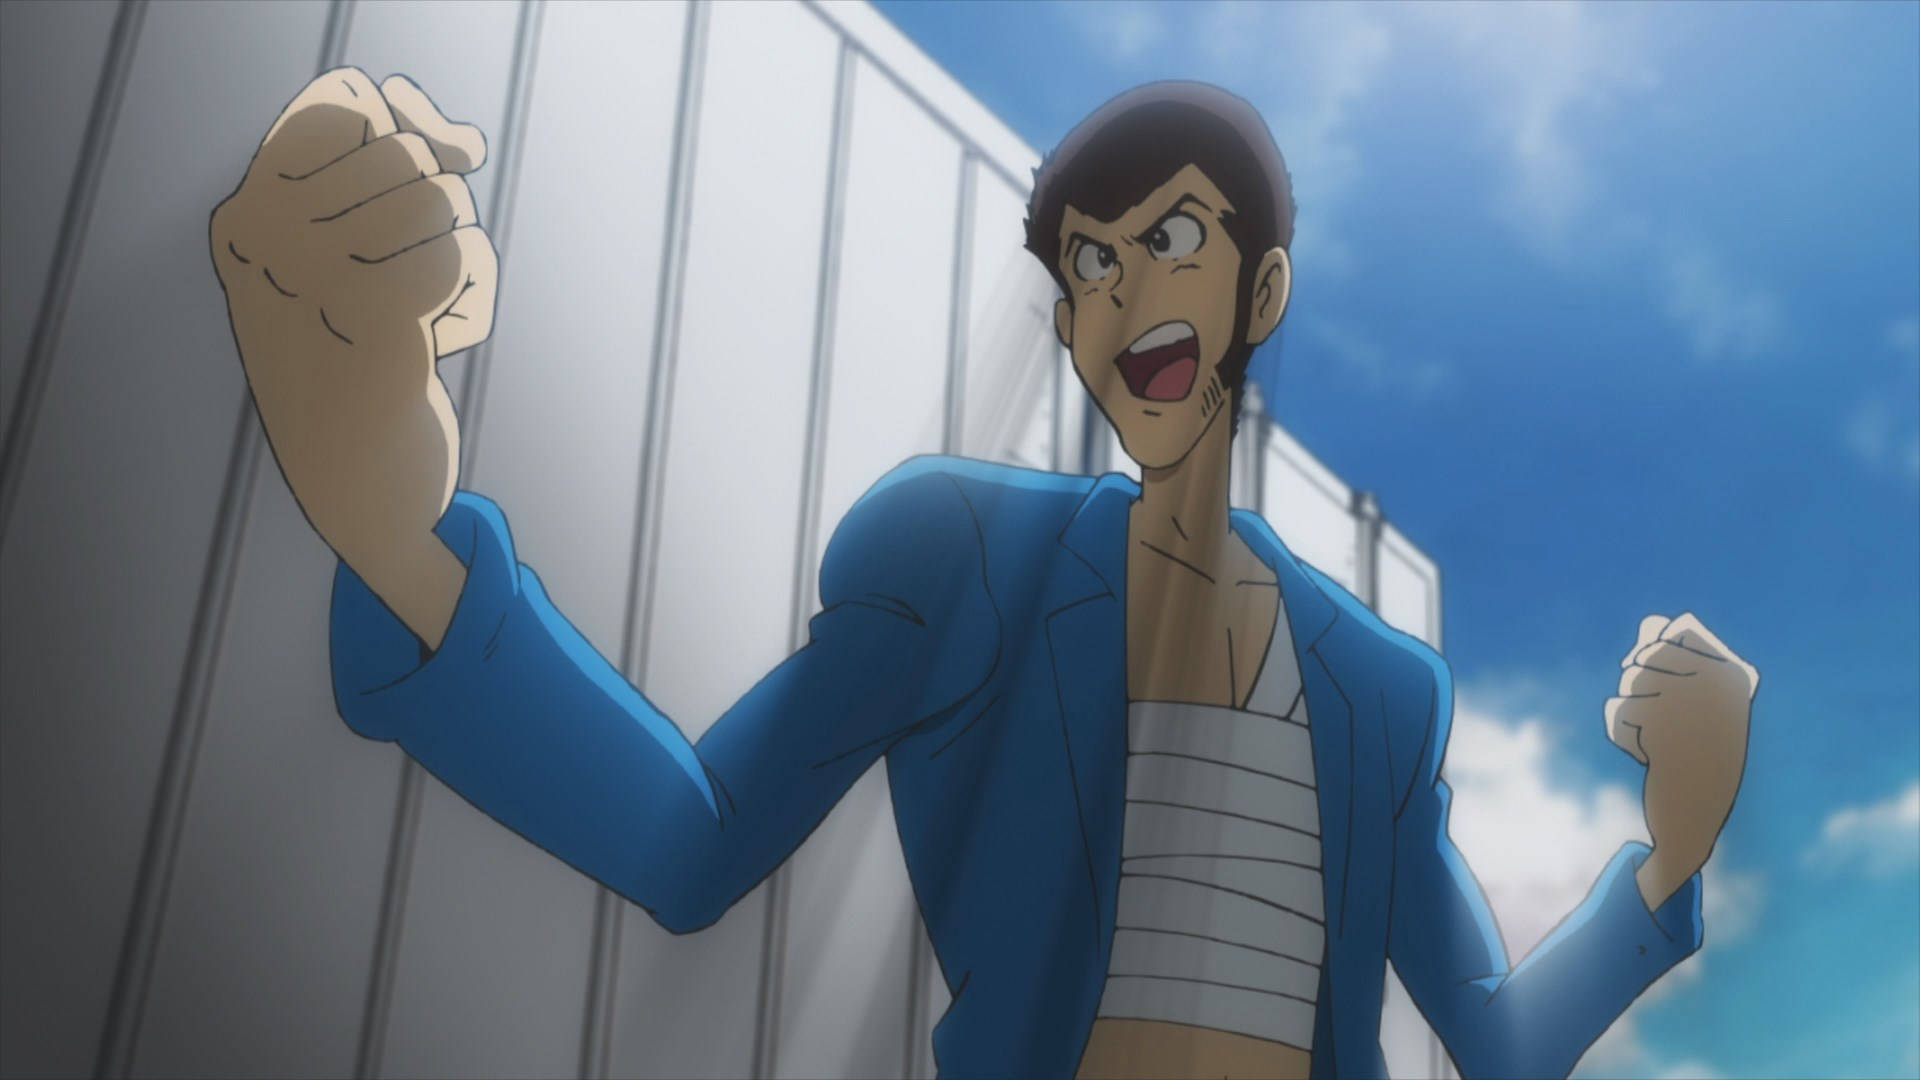 Master Thief Lupin The Third In Action Background